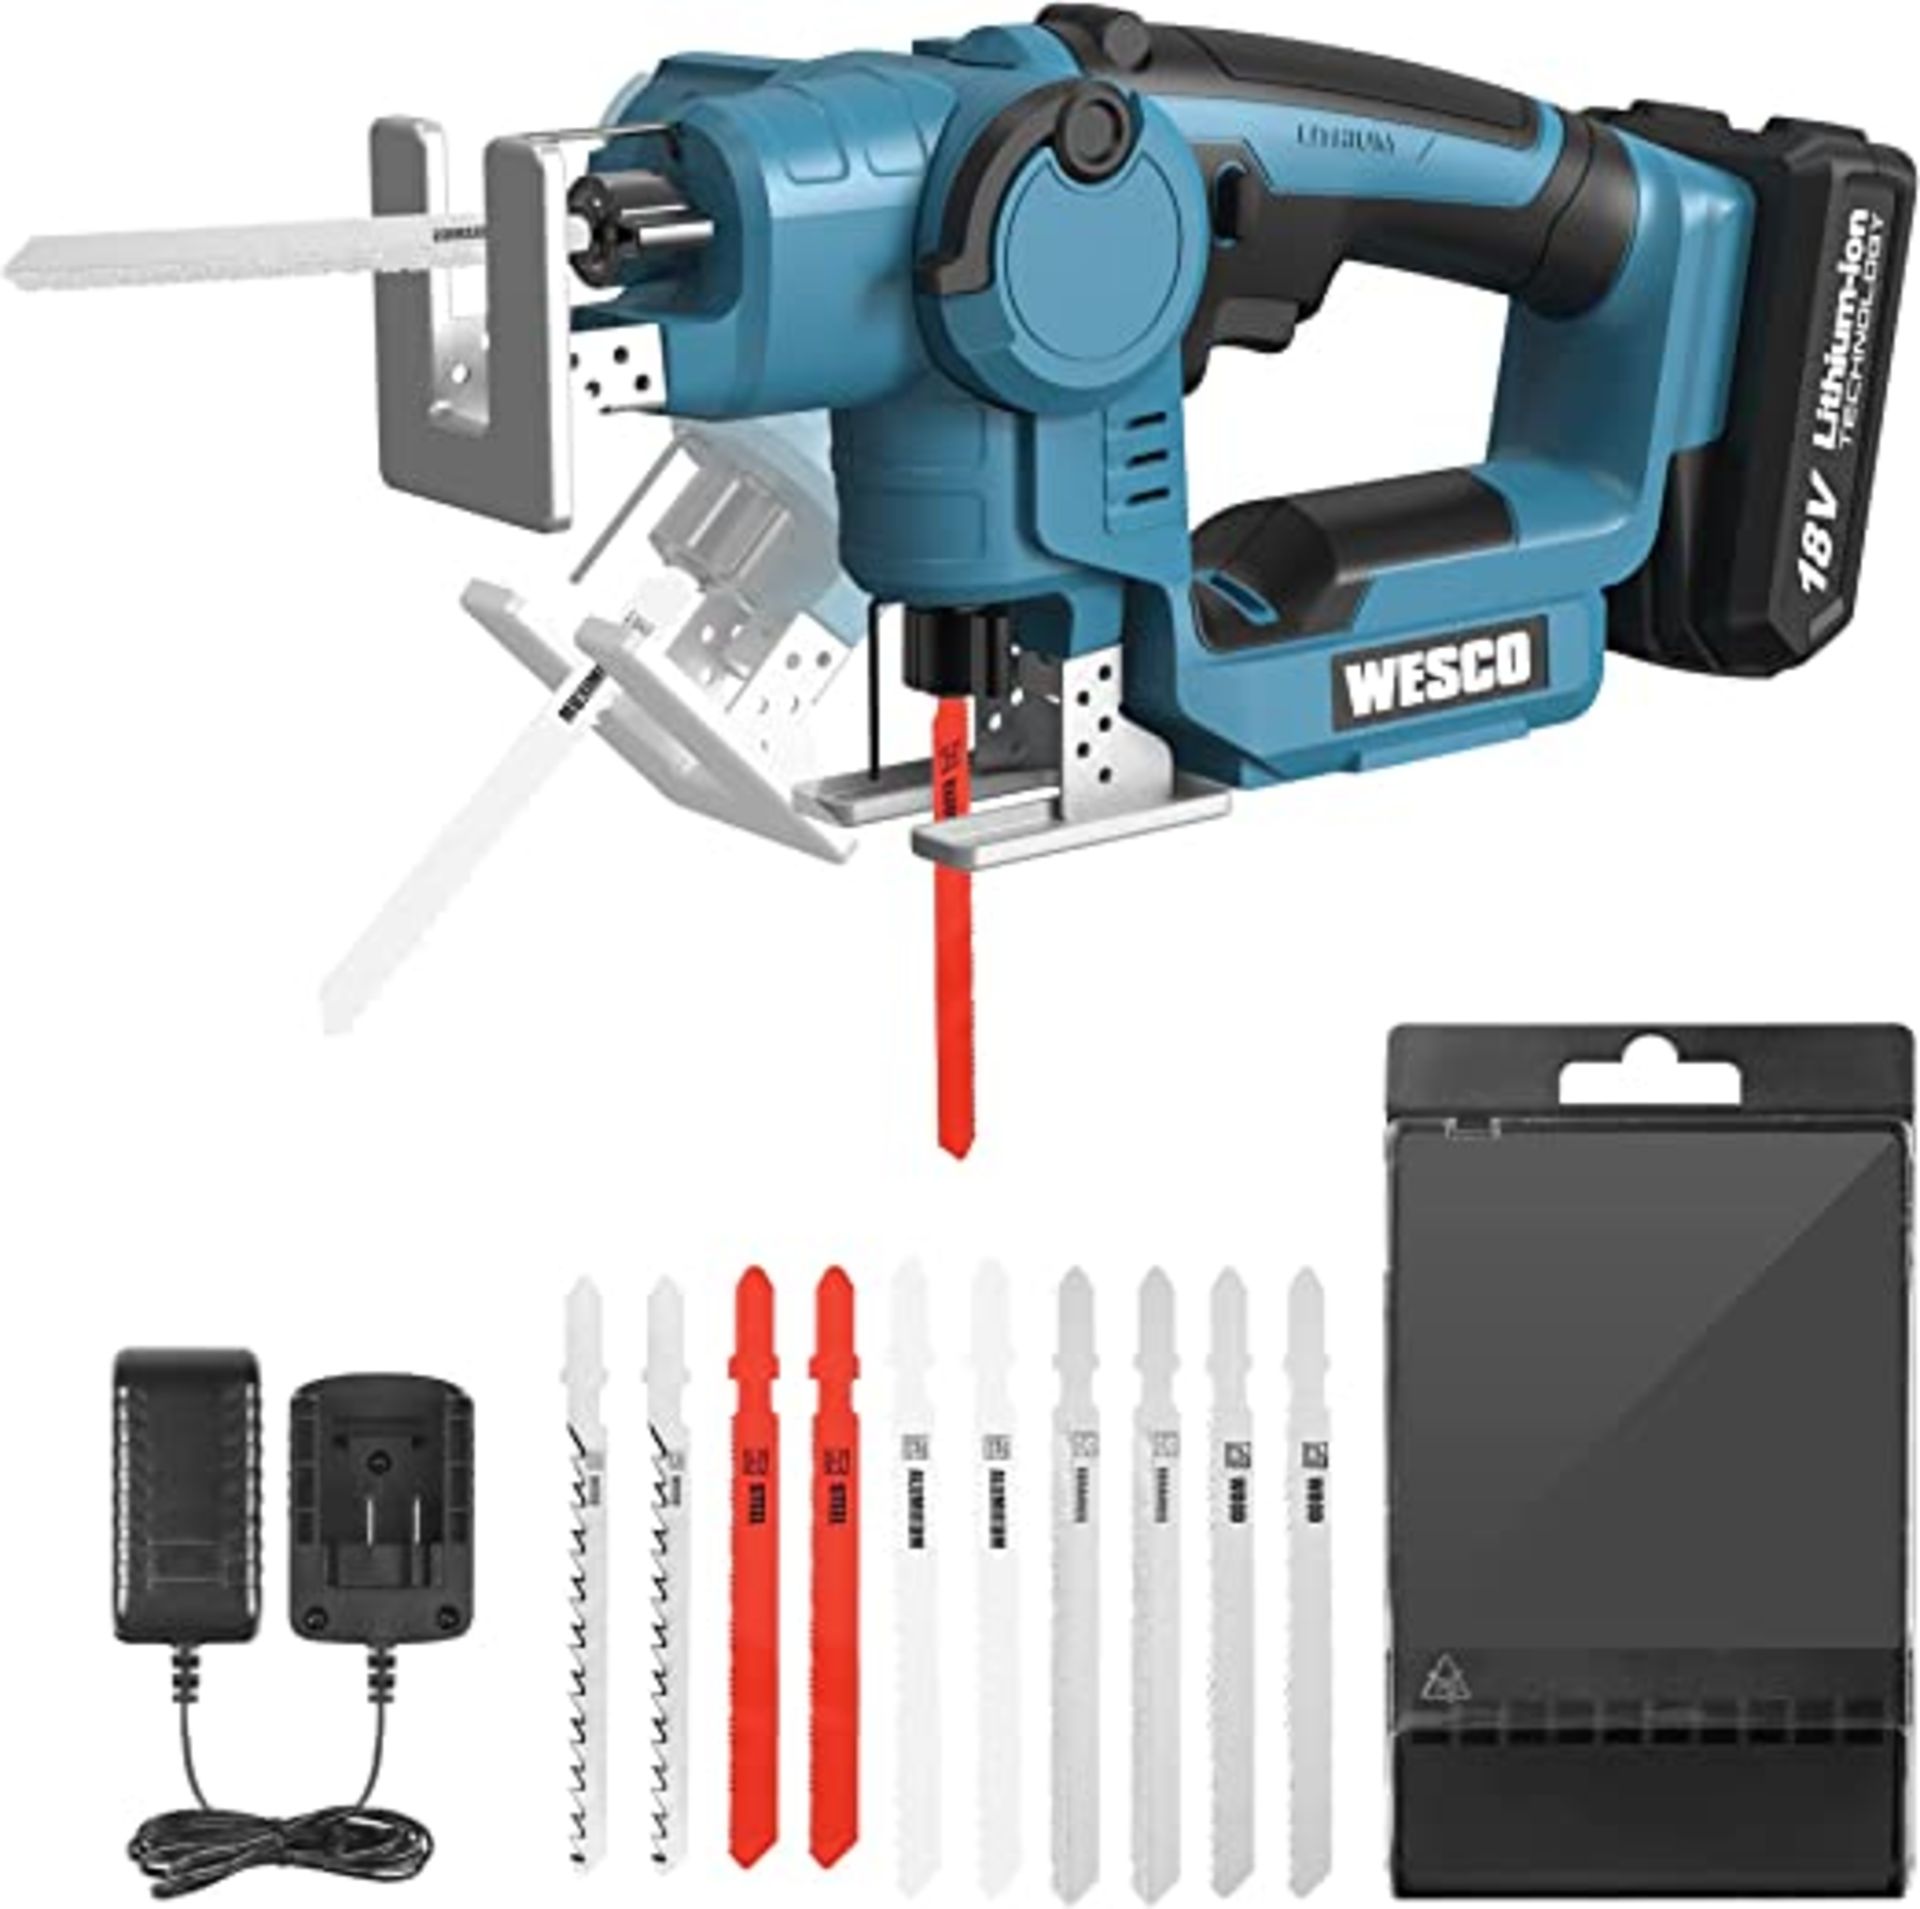 New Boxed WESCO 18v Electric Saw, 2500SPM Jigsaw Tool, Electric saws to Cut Wood, Cordless Jigsaw